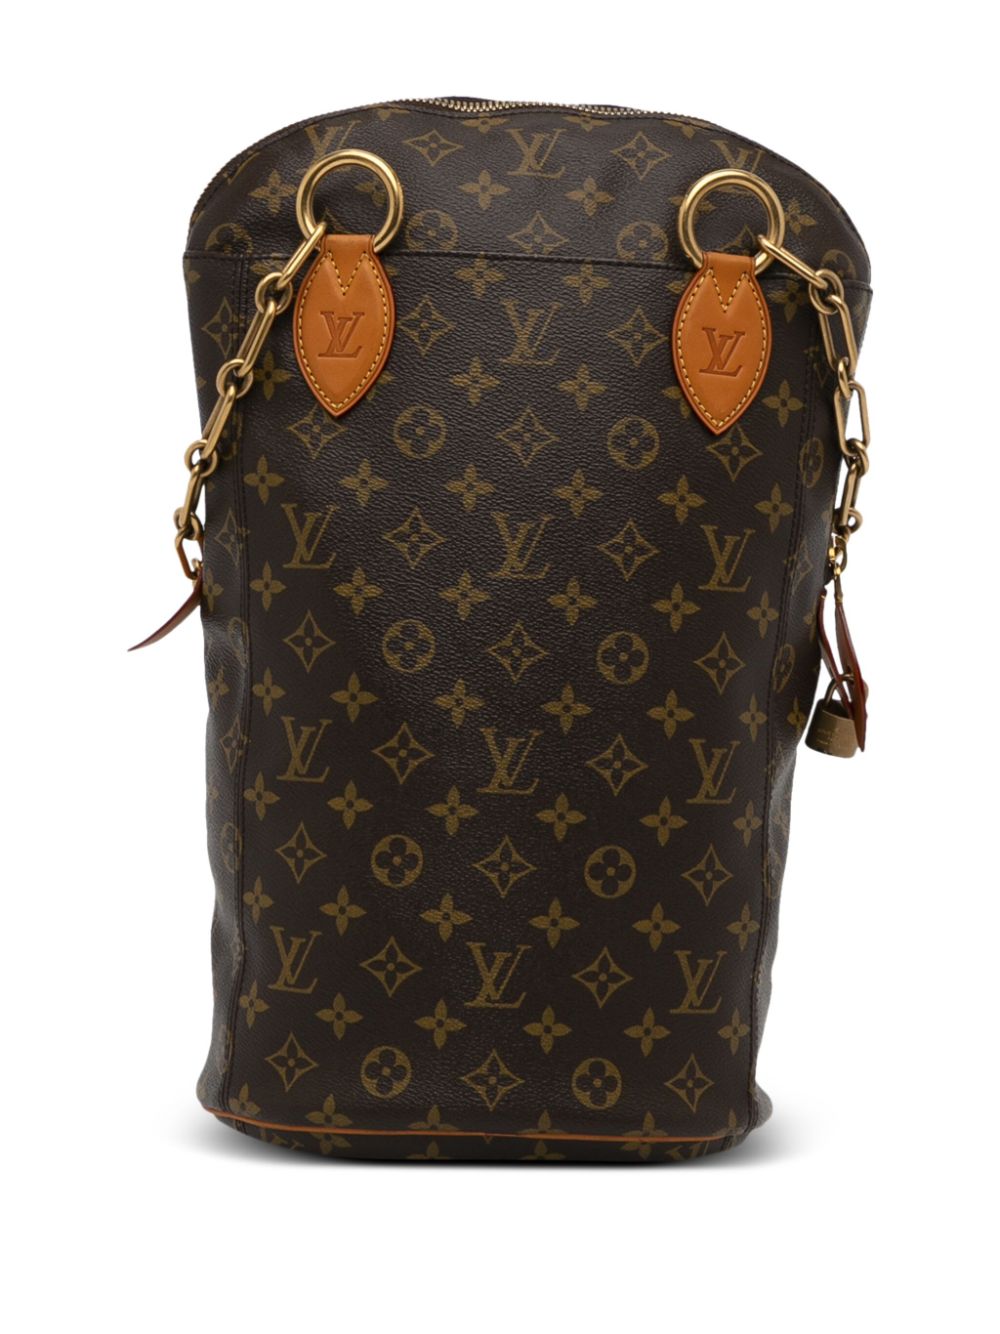 Louis Vuitton x Karl Lagerfeld 2014 pre-owned Punching PM shoulder bag - Blauw